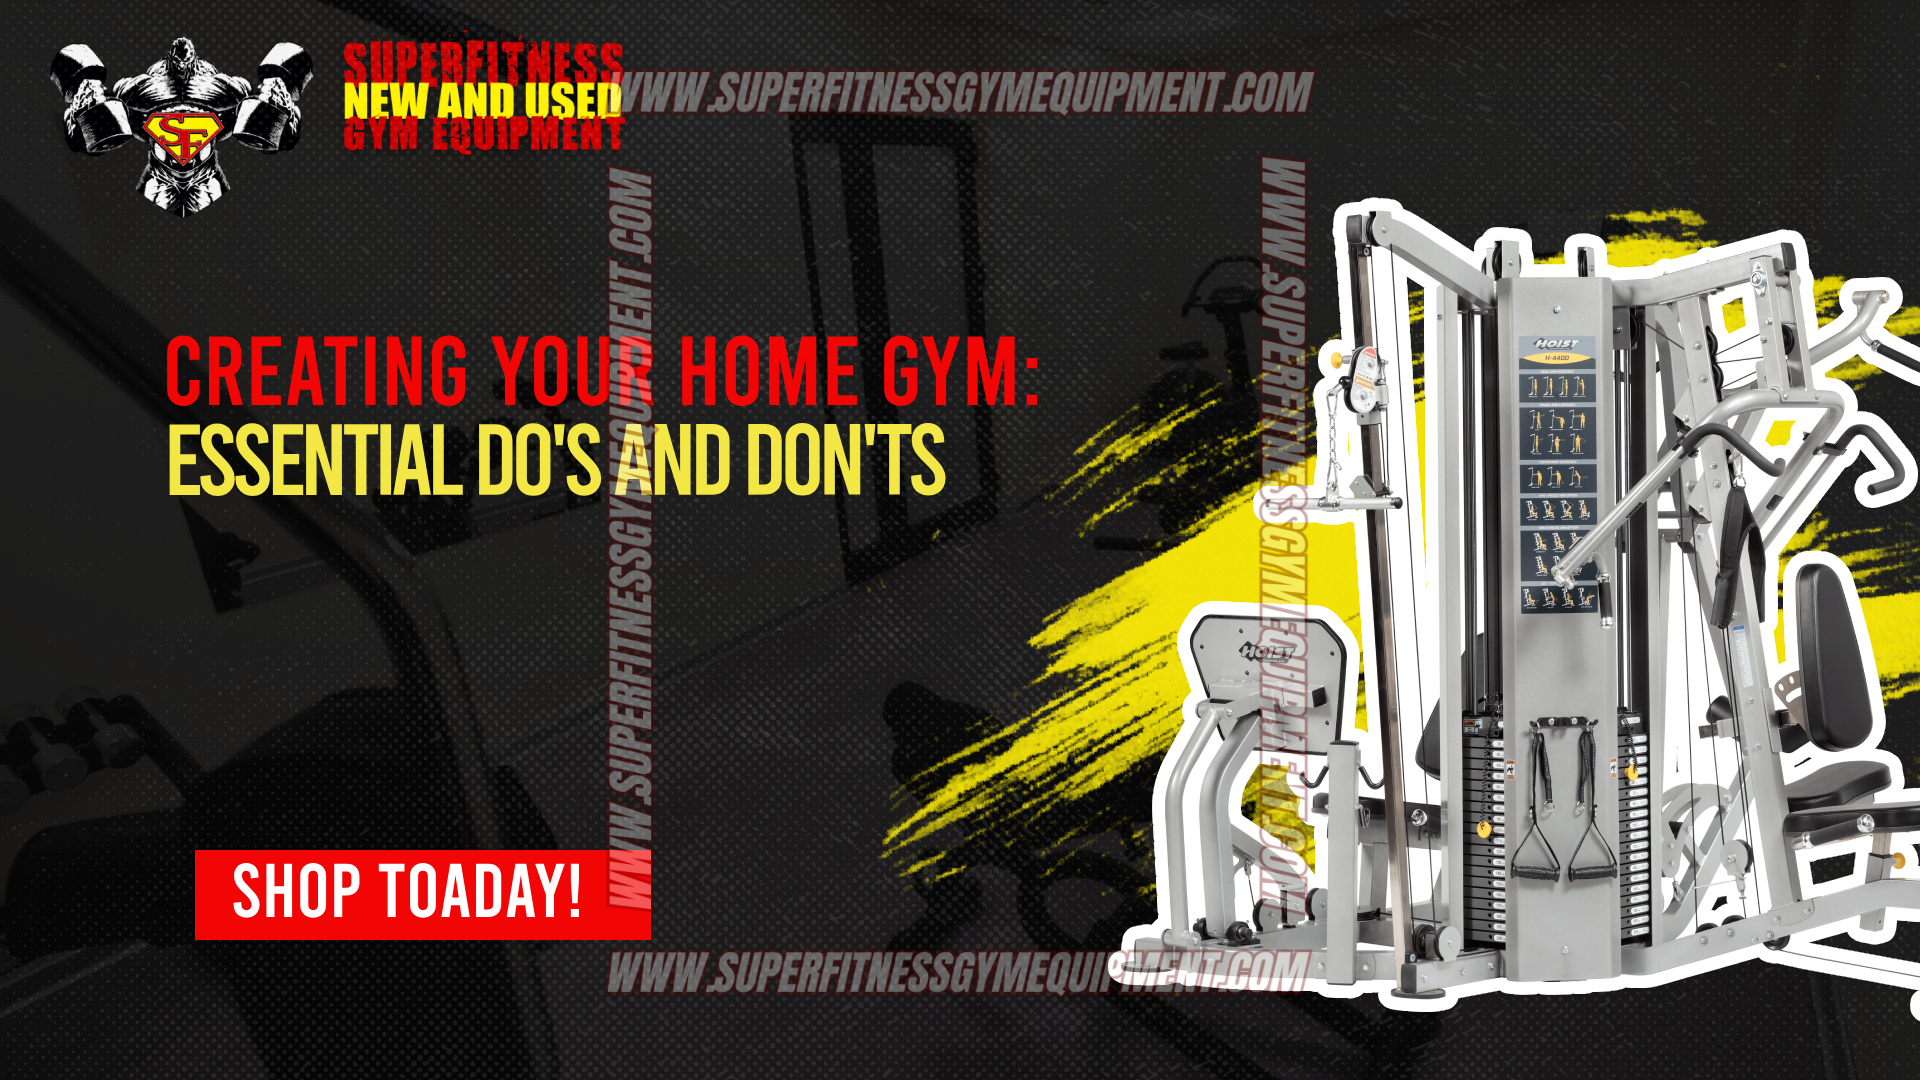 Creating Your Home Gym